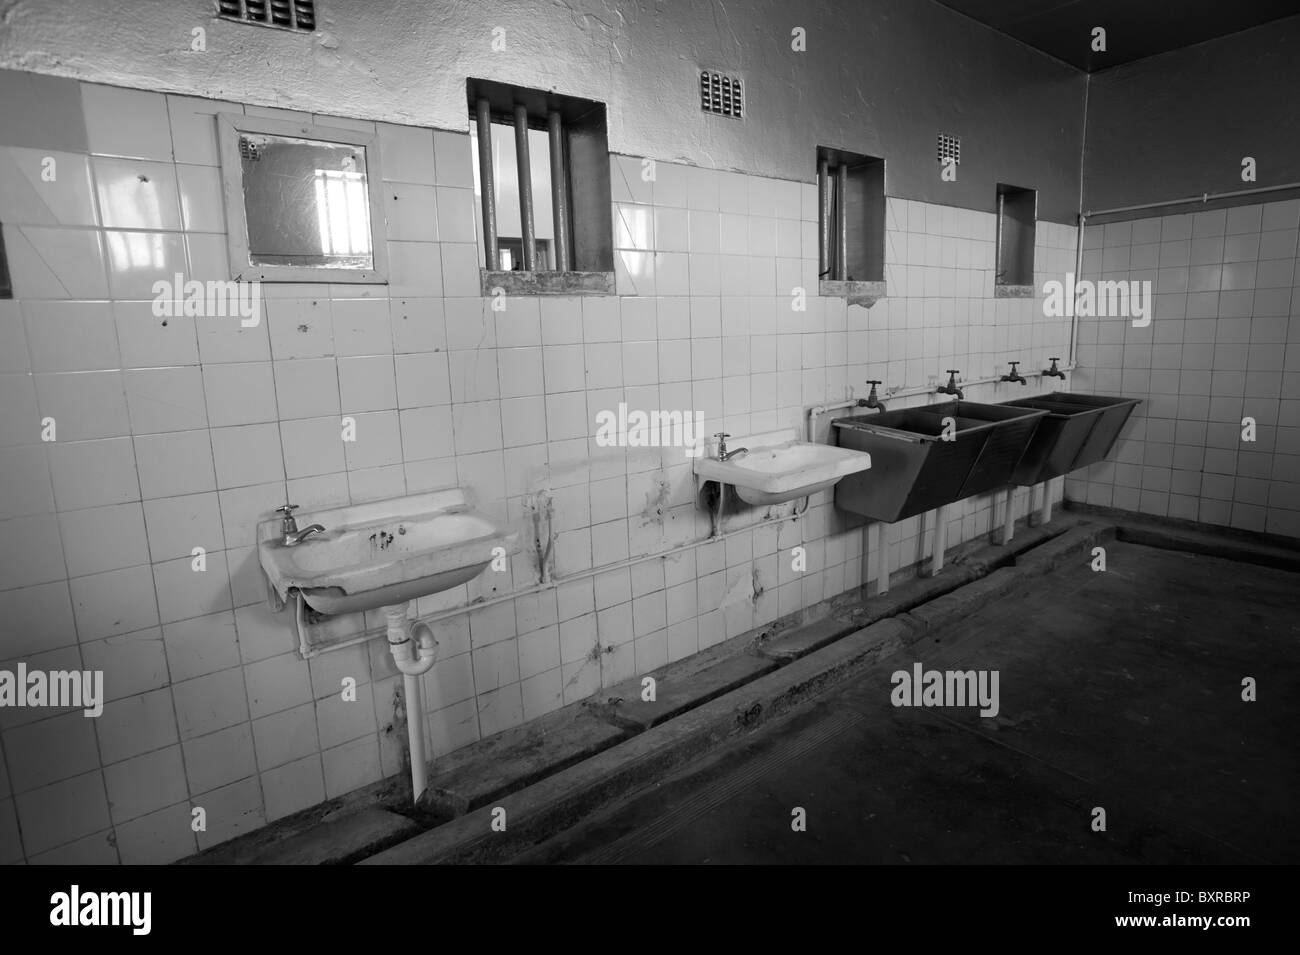 Premium Photo  Vertical shot of a scary toilet in black and white in prison